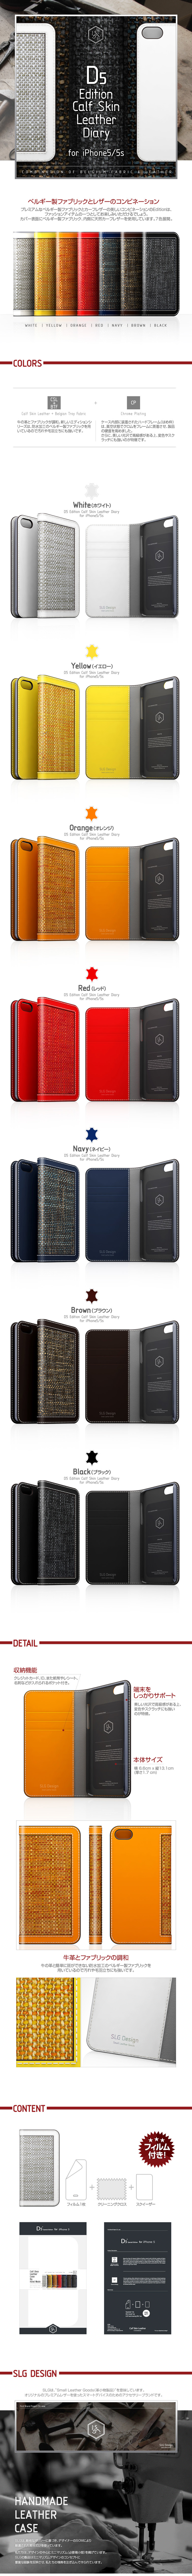 D5 Edition Calf Skin Leather Diary